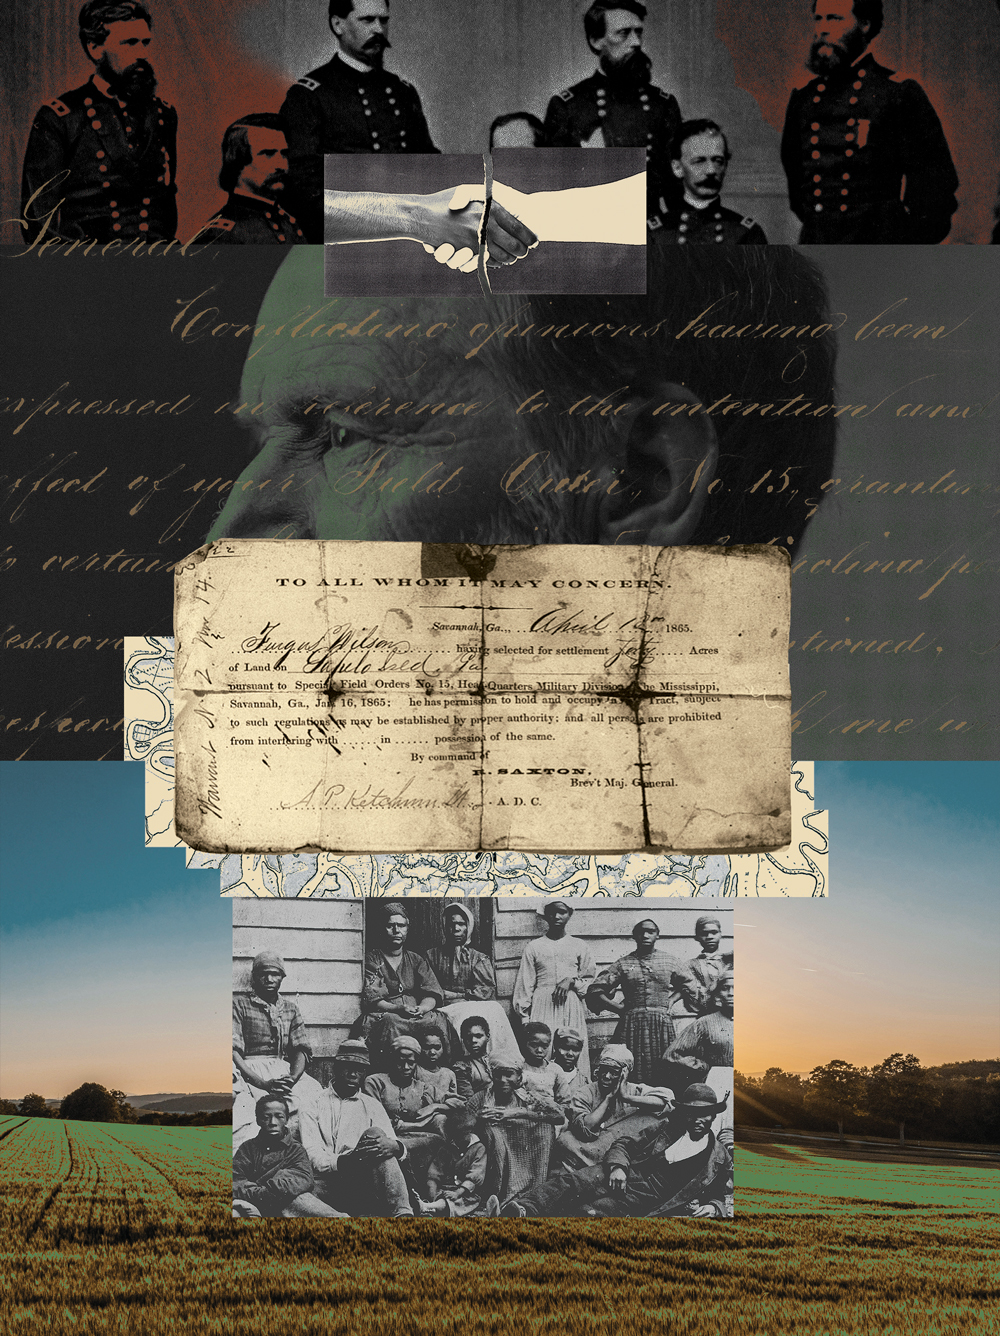 A collage illustration that marries imagery of William T. Sherman with fertile sunlit land and a map. Also in the image are Union soldiers and Black Americans around the time of the Civil War. Overlaying the image is Sherman’s Special Field Orders, No. 15, which reserved coastal land in South Carolina, Georgia, and Florida for the formerly enslaved to live and work on and govern themselves. However, at the top of the illustration is the image of a handshake between a Black and white man, torn in two.